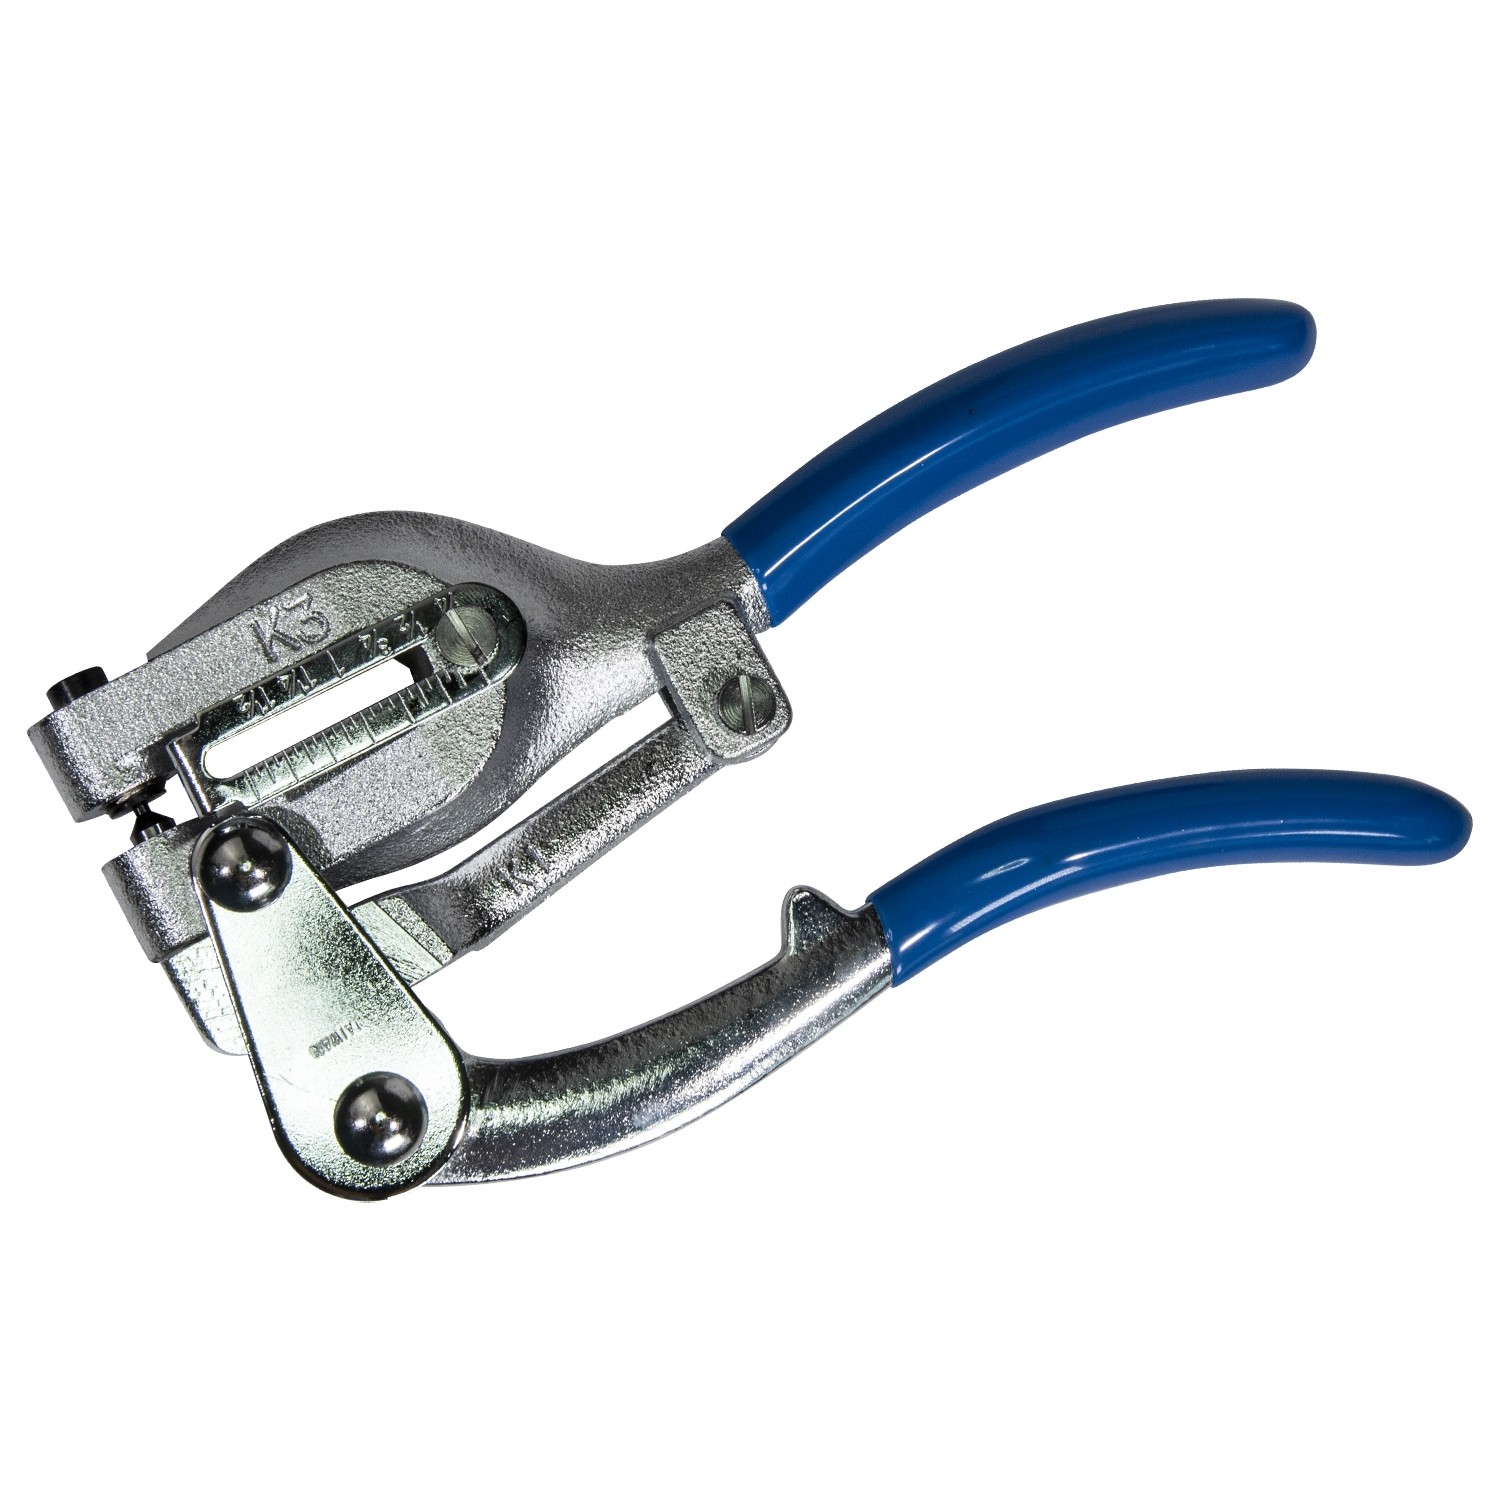 Europower Large Hole Punch Pliers with 7 Popular Sizes, PLR-137.00